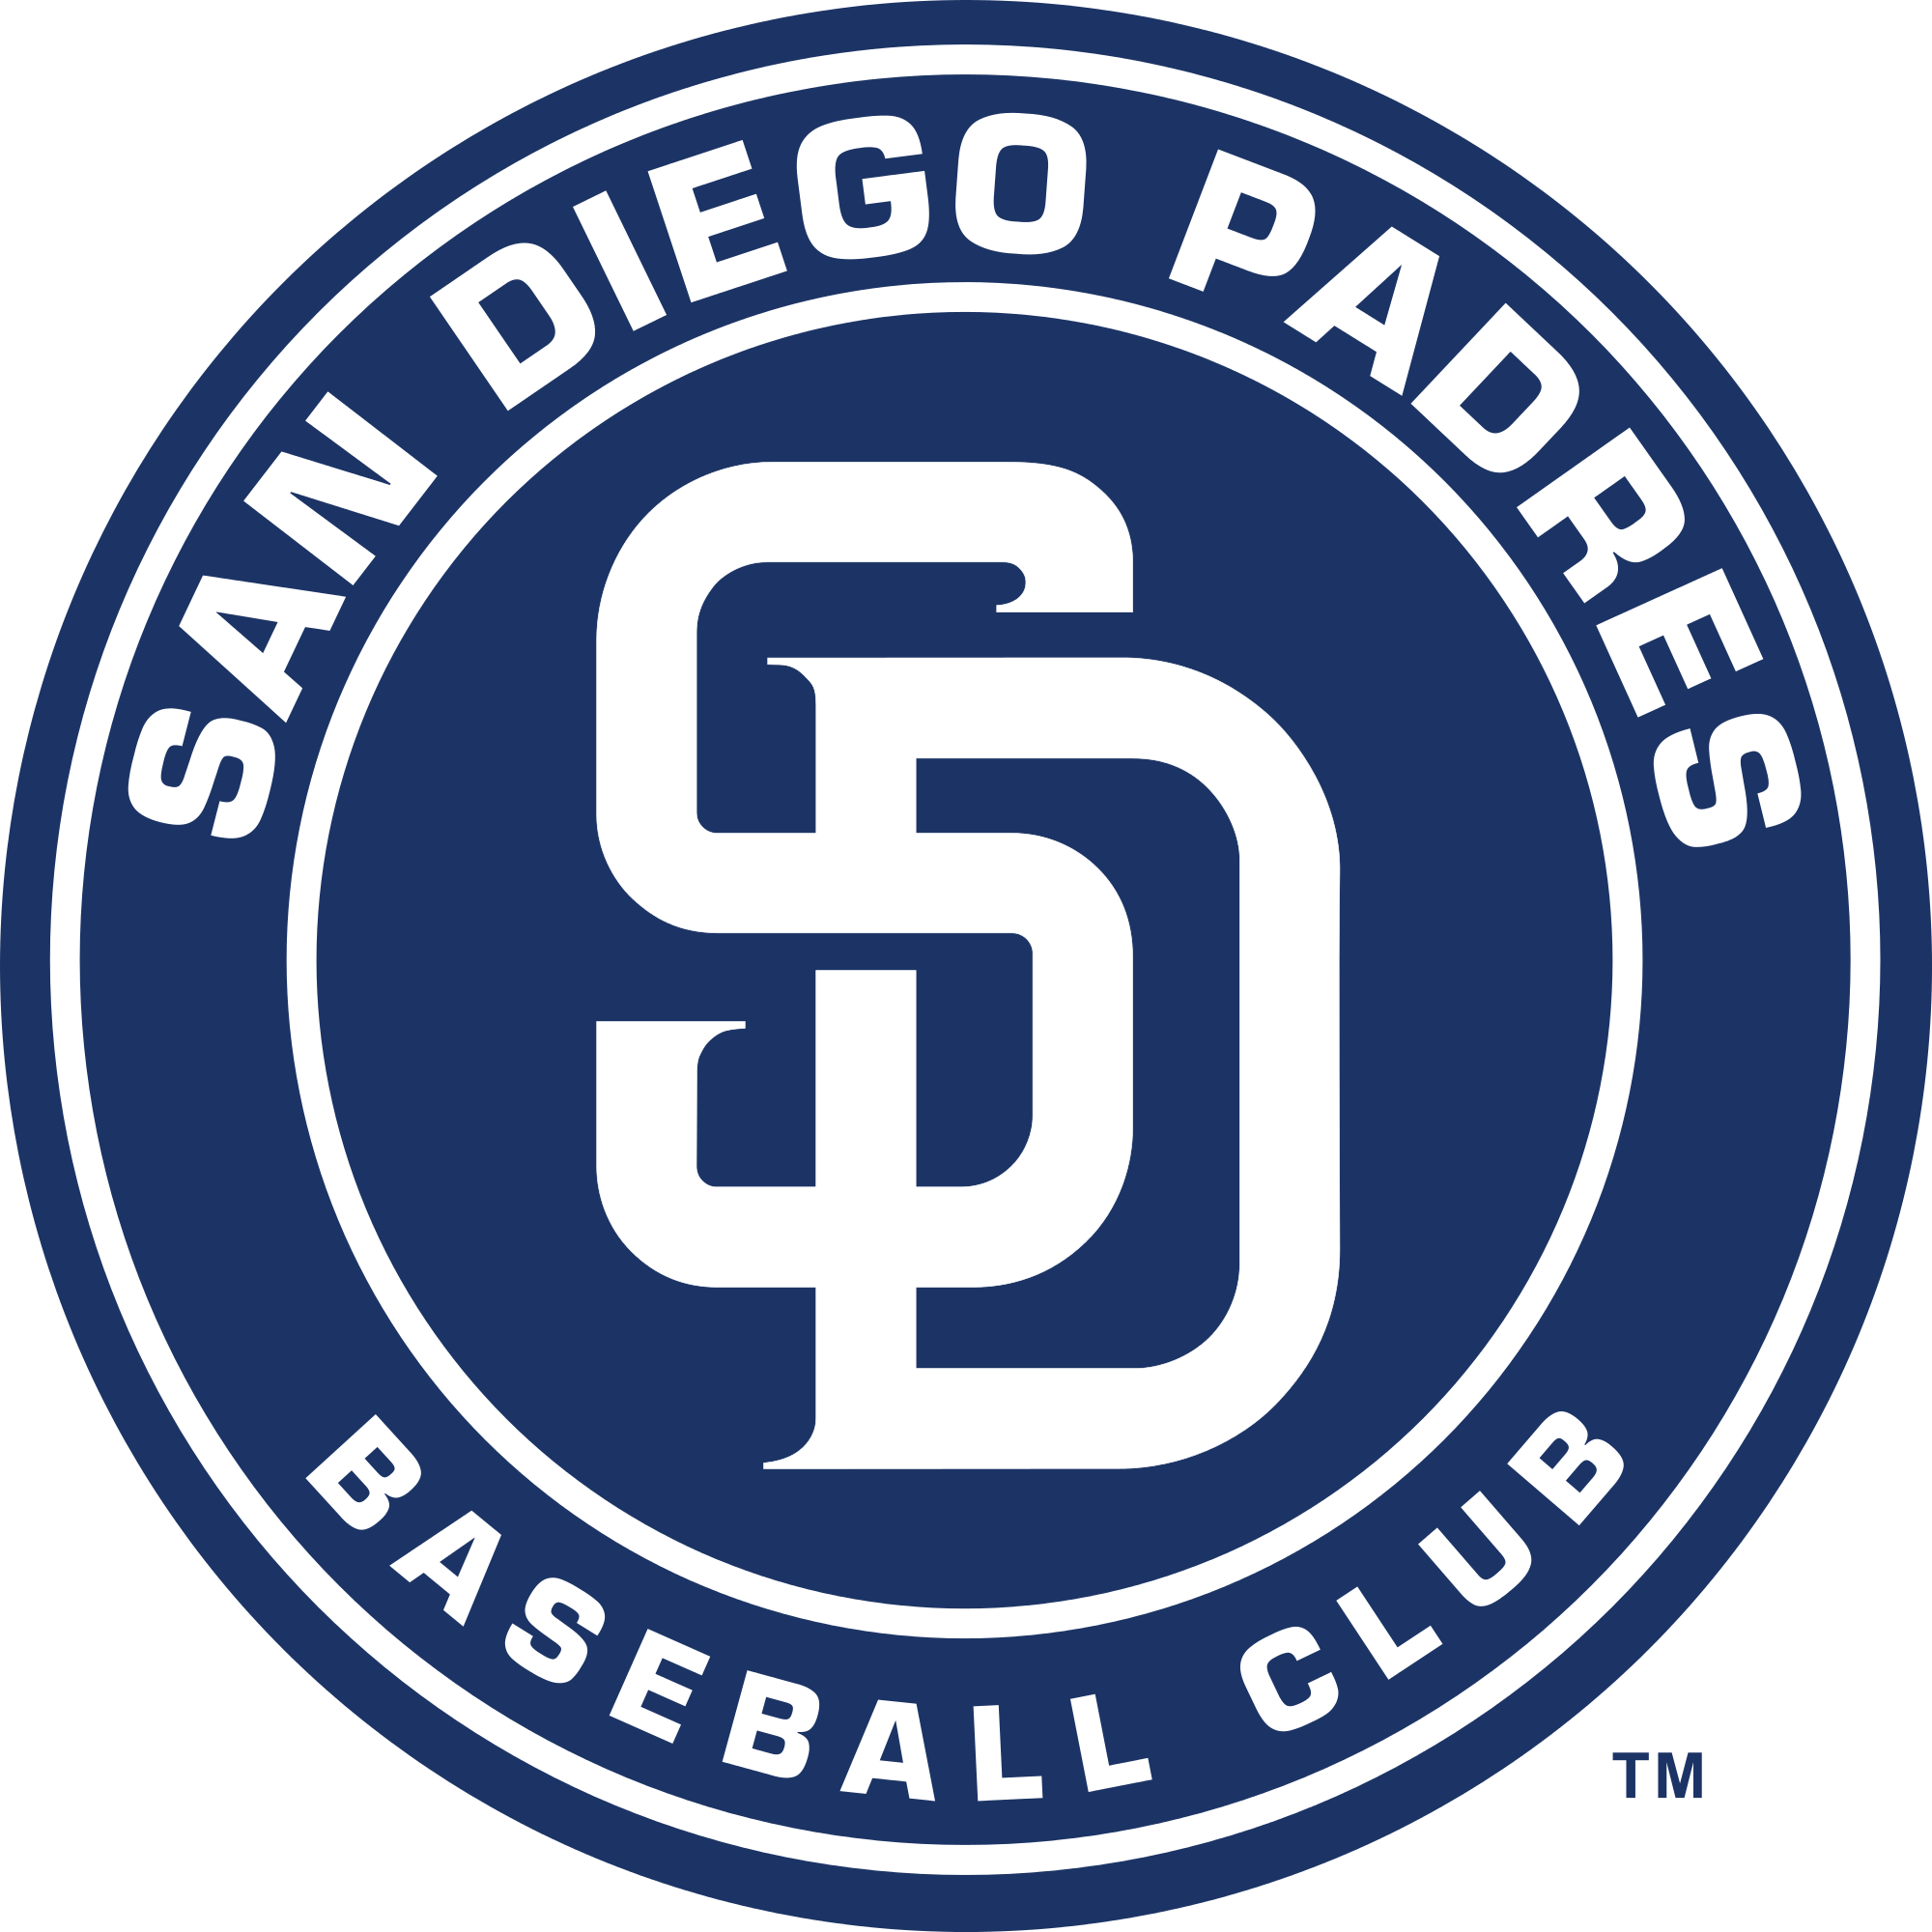 Padres Logo - File:San Diego Padres logo.svg - Wikimedia Commons